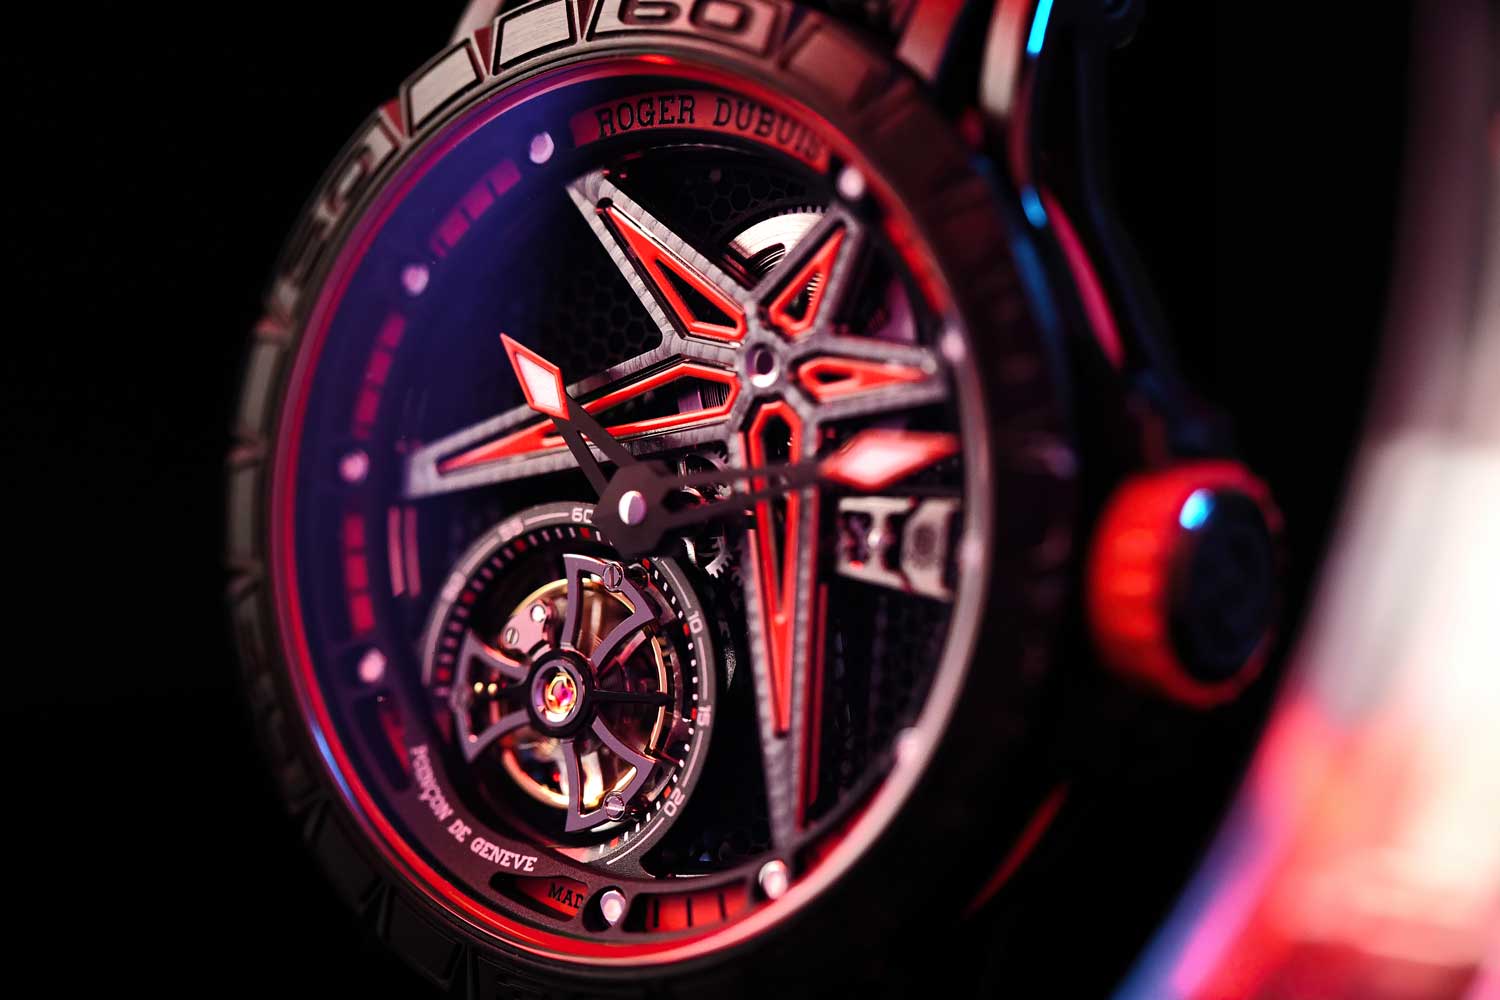 The skeleton dial stands out with its automotive-inspired honeycomb texture, red flange